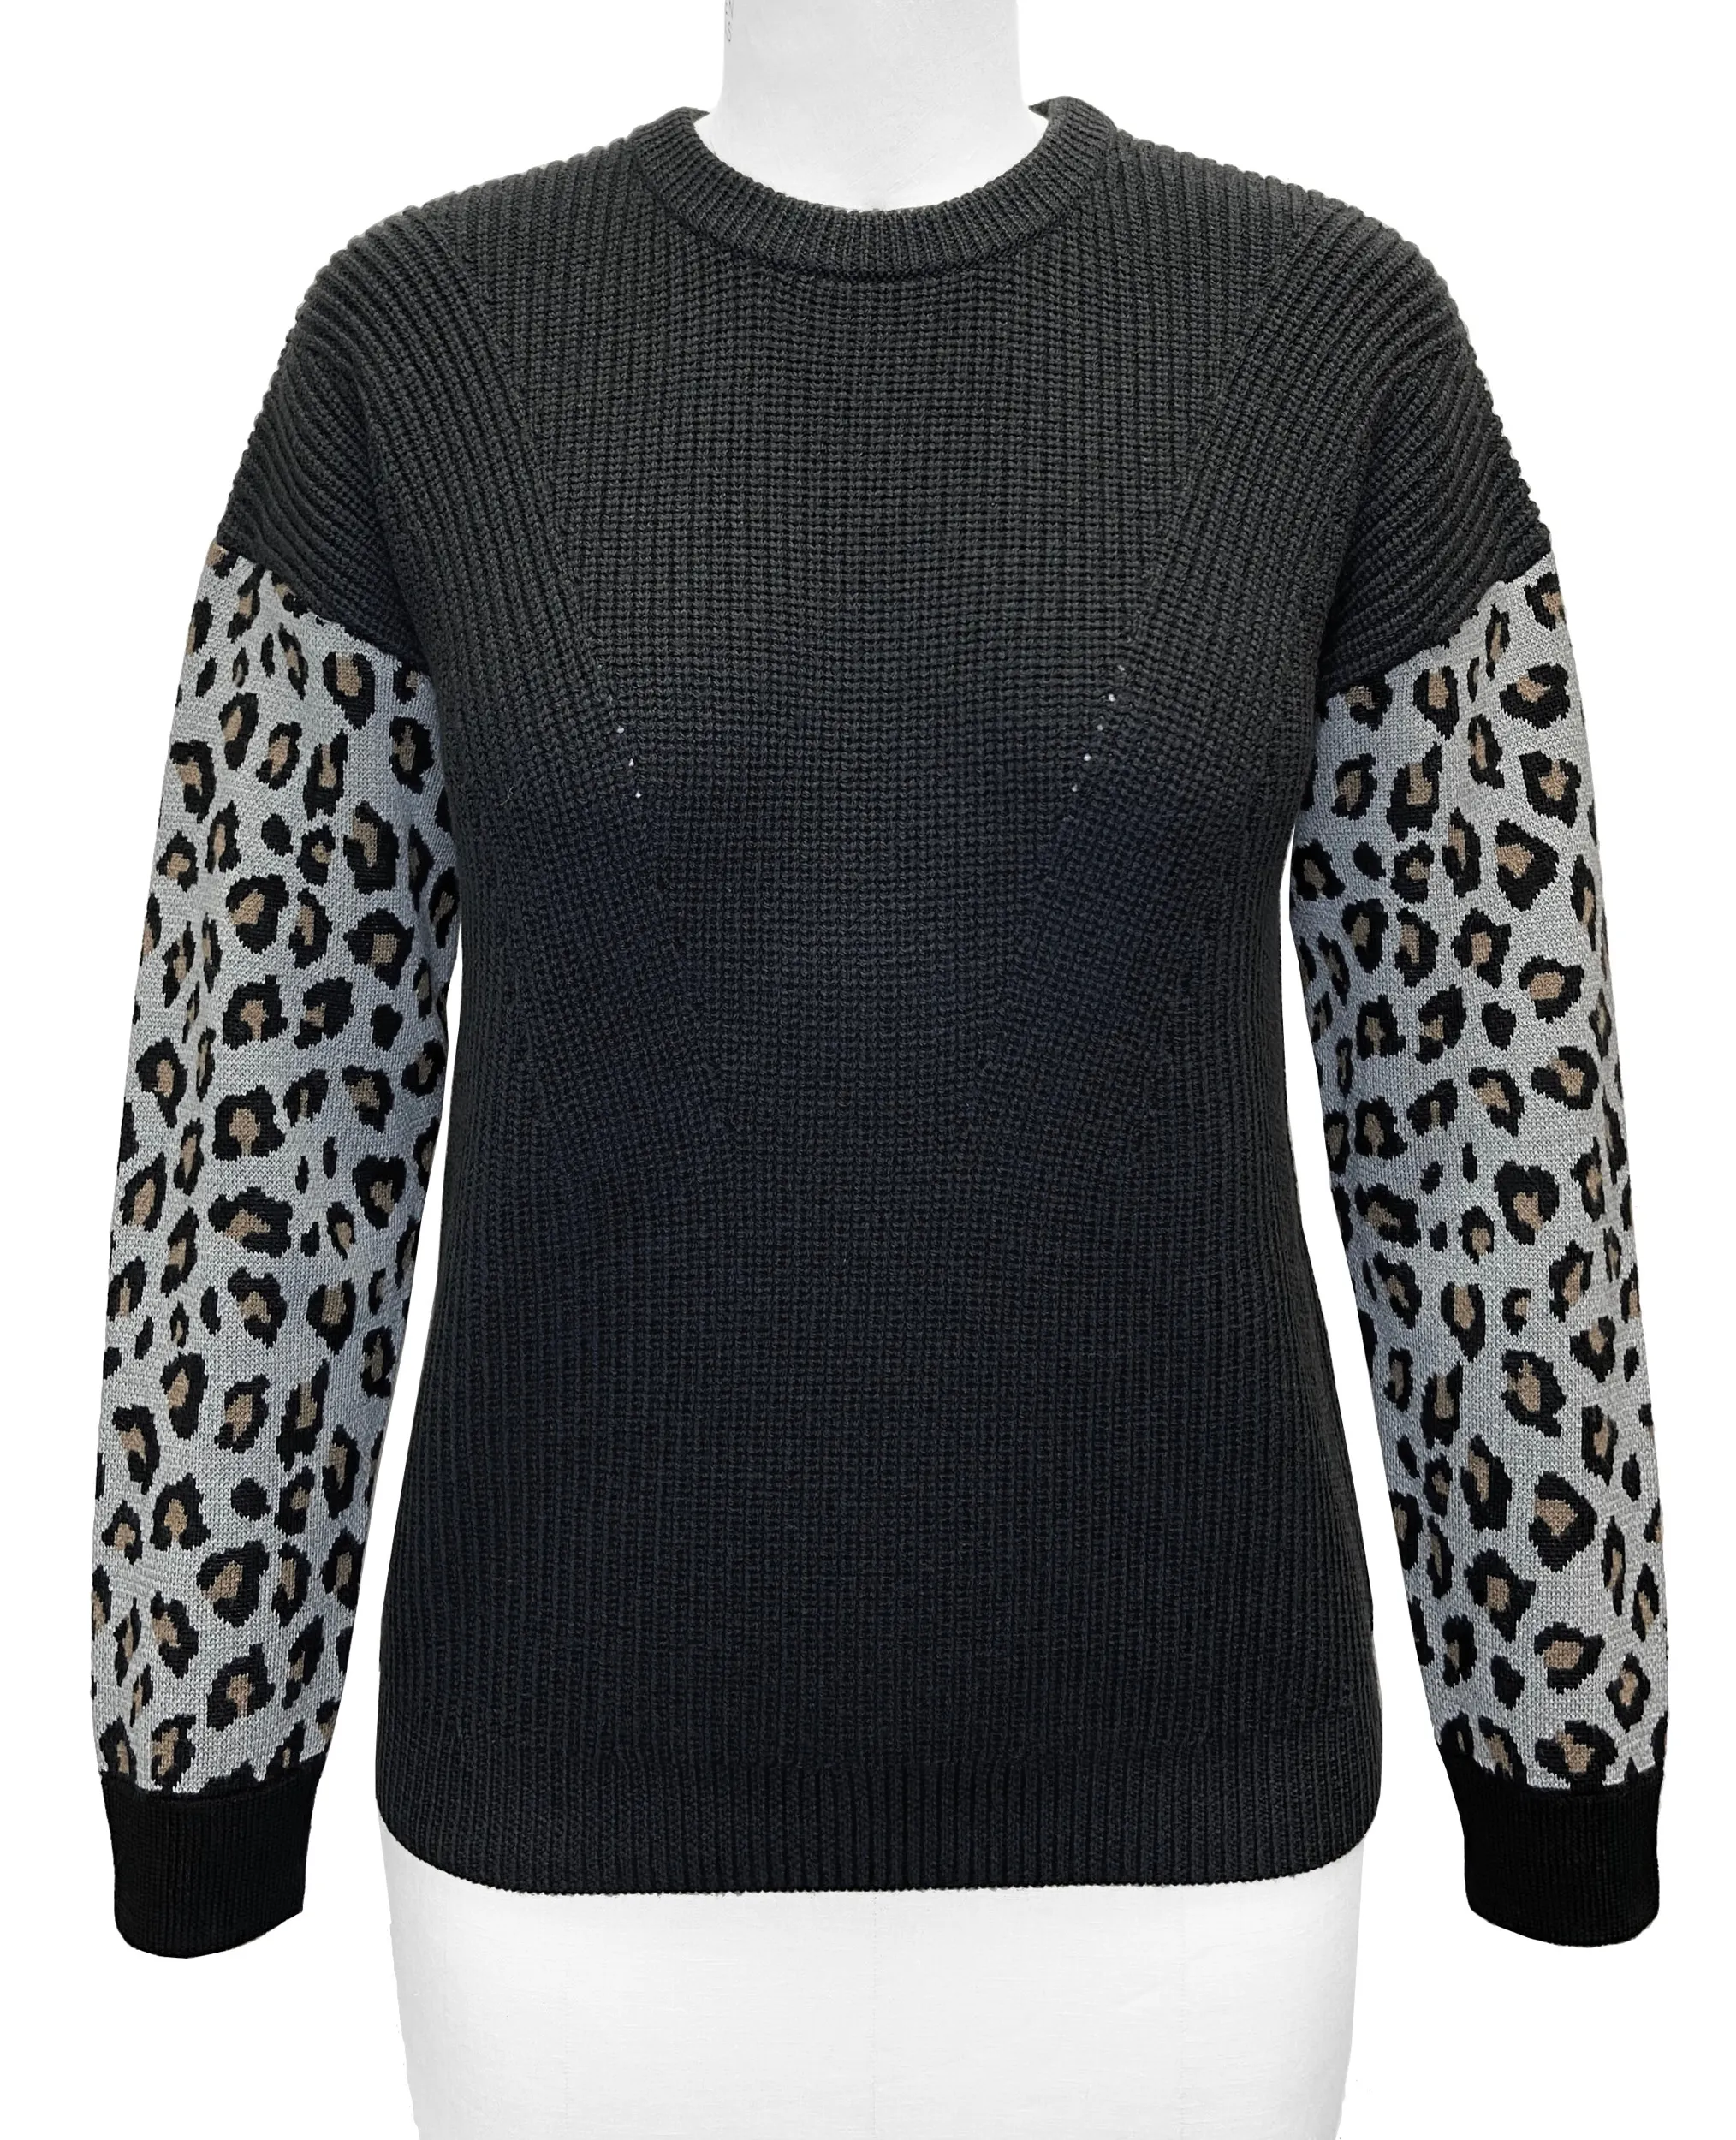 FW 22/23 Women's Moving Half Cardigan Stitches Body 3 colour Leopard Jacquard Sleeves Crew Neck Knitted Pullover